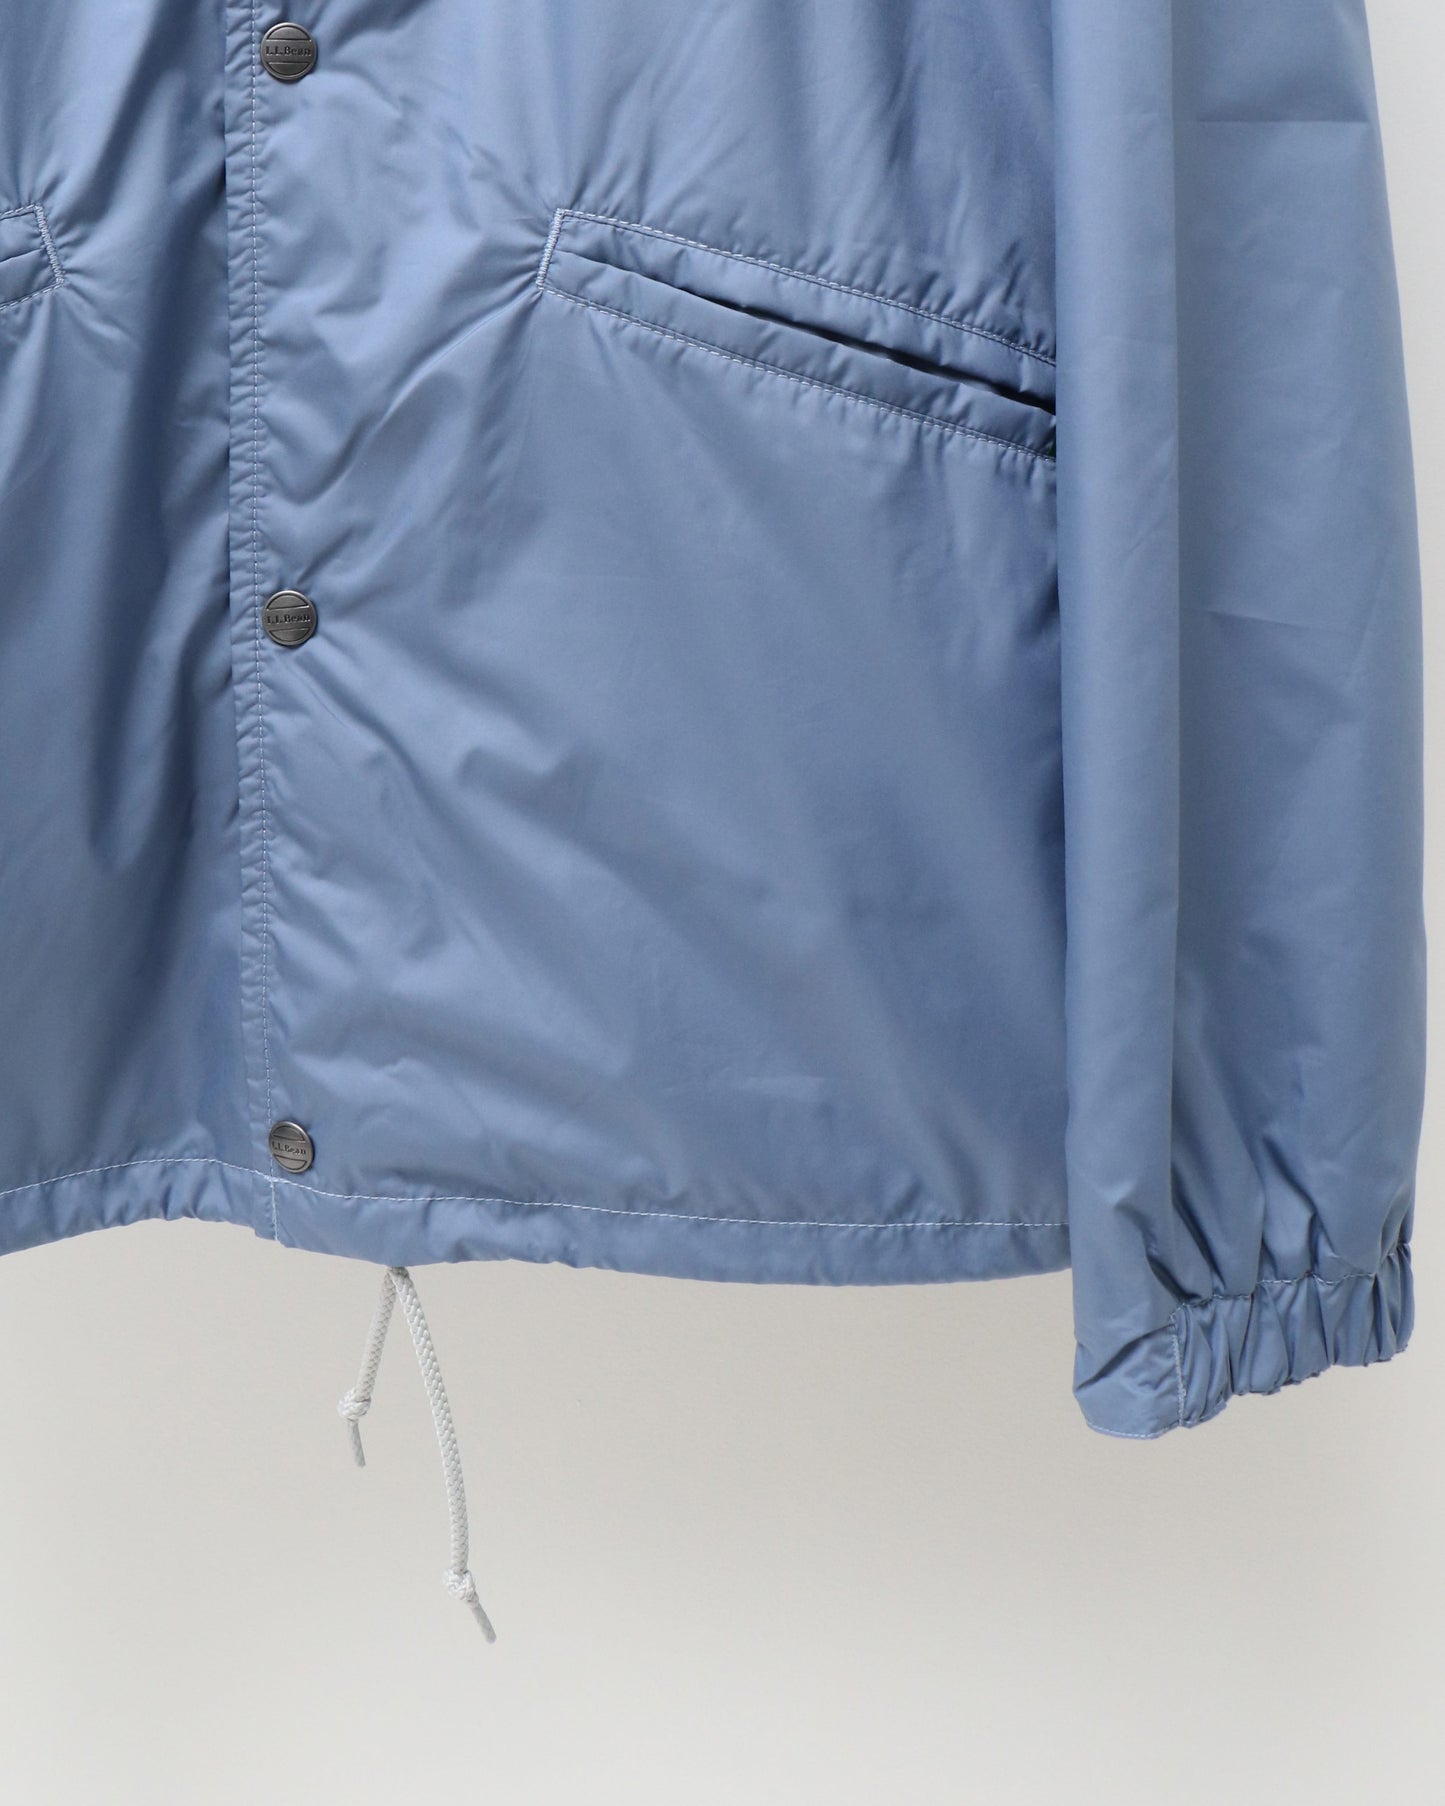 Bean's Lined Coach Jacket